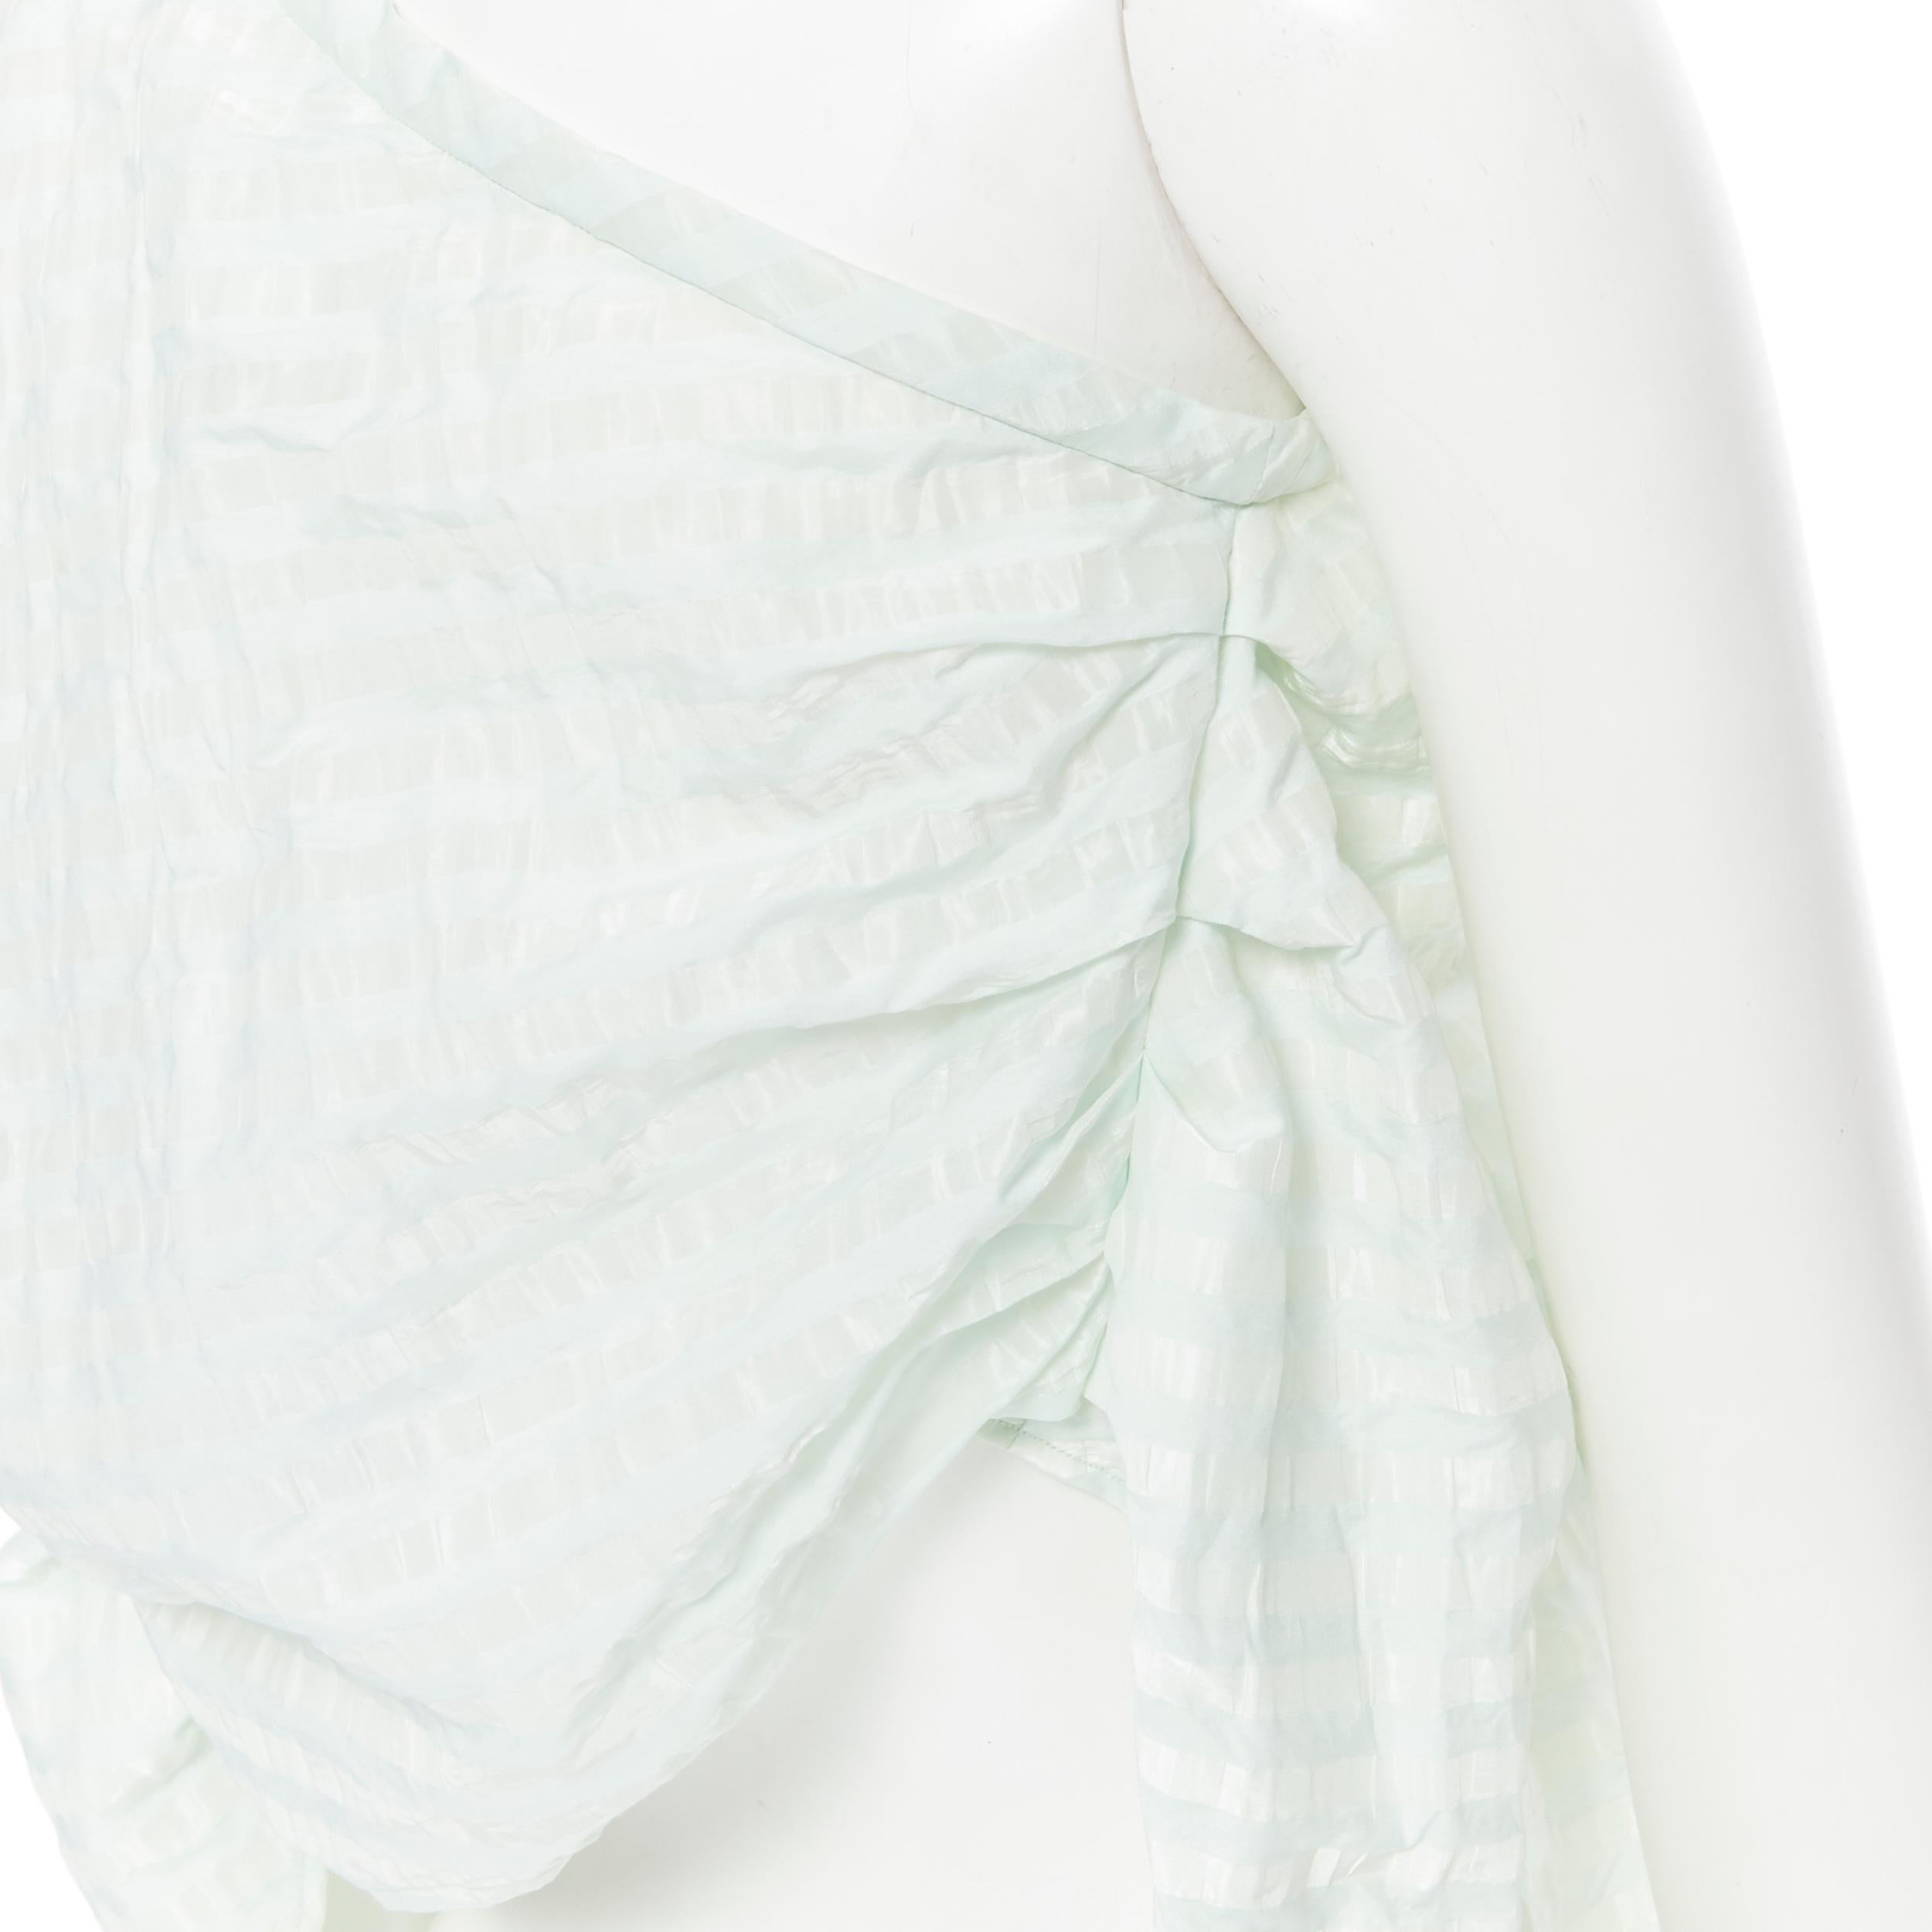 new ROSIE ASSOULIN pastel green striped rusched draped back one shoulder top XS
Brand: Rosie Assoulin
Designer: Rosie Assoulin
Model Name / Style: One shoulder top
Material: Nylon, cotton, silk
Color: Green
Pattern: Striped
Lining material: